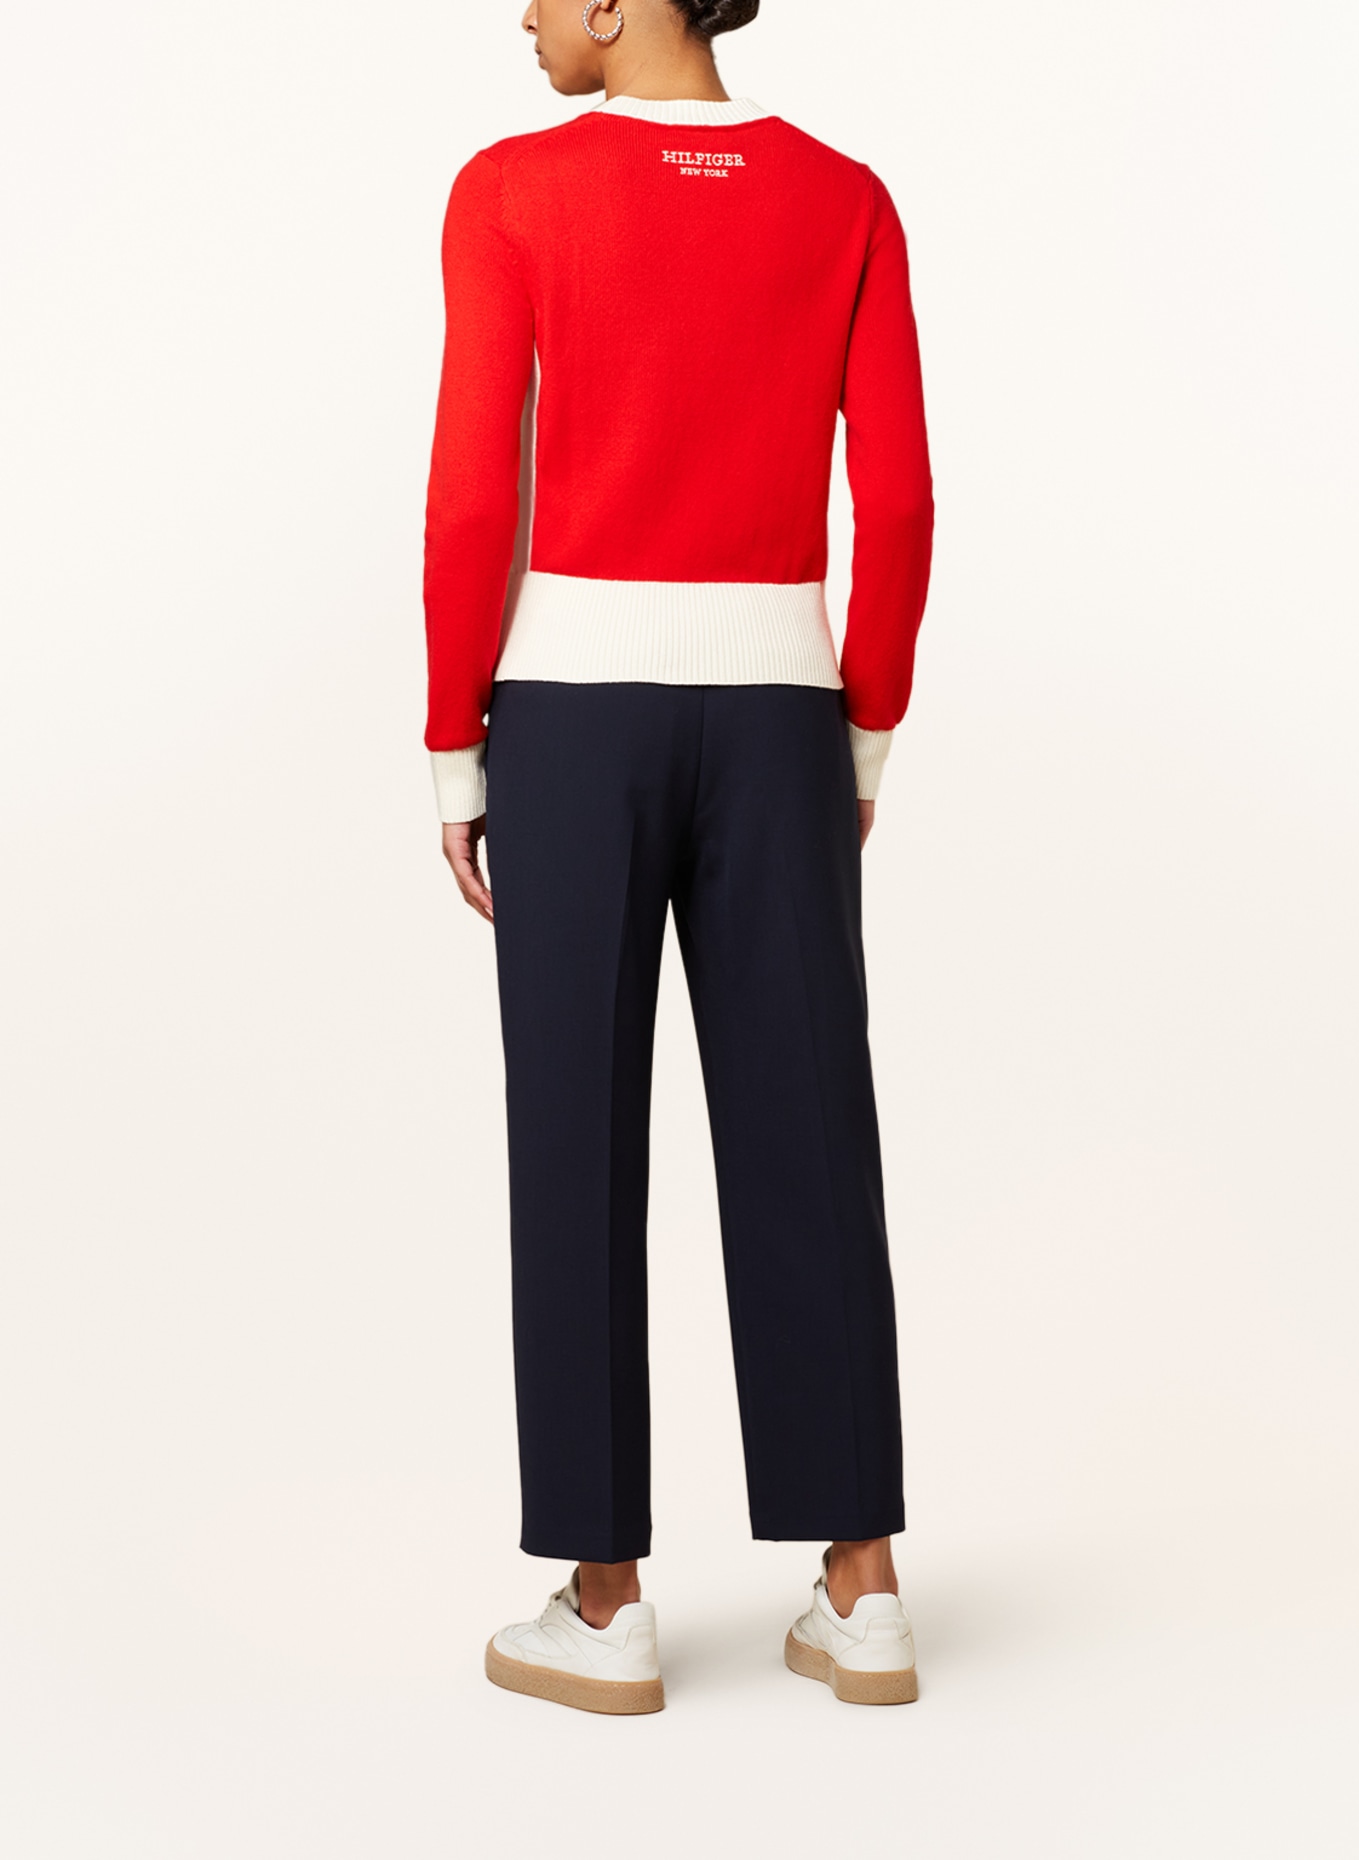 TOMMY HILFIGER Pullover, Farbe: ROT/ CREME (Bild 3)